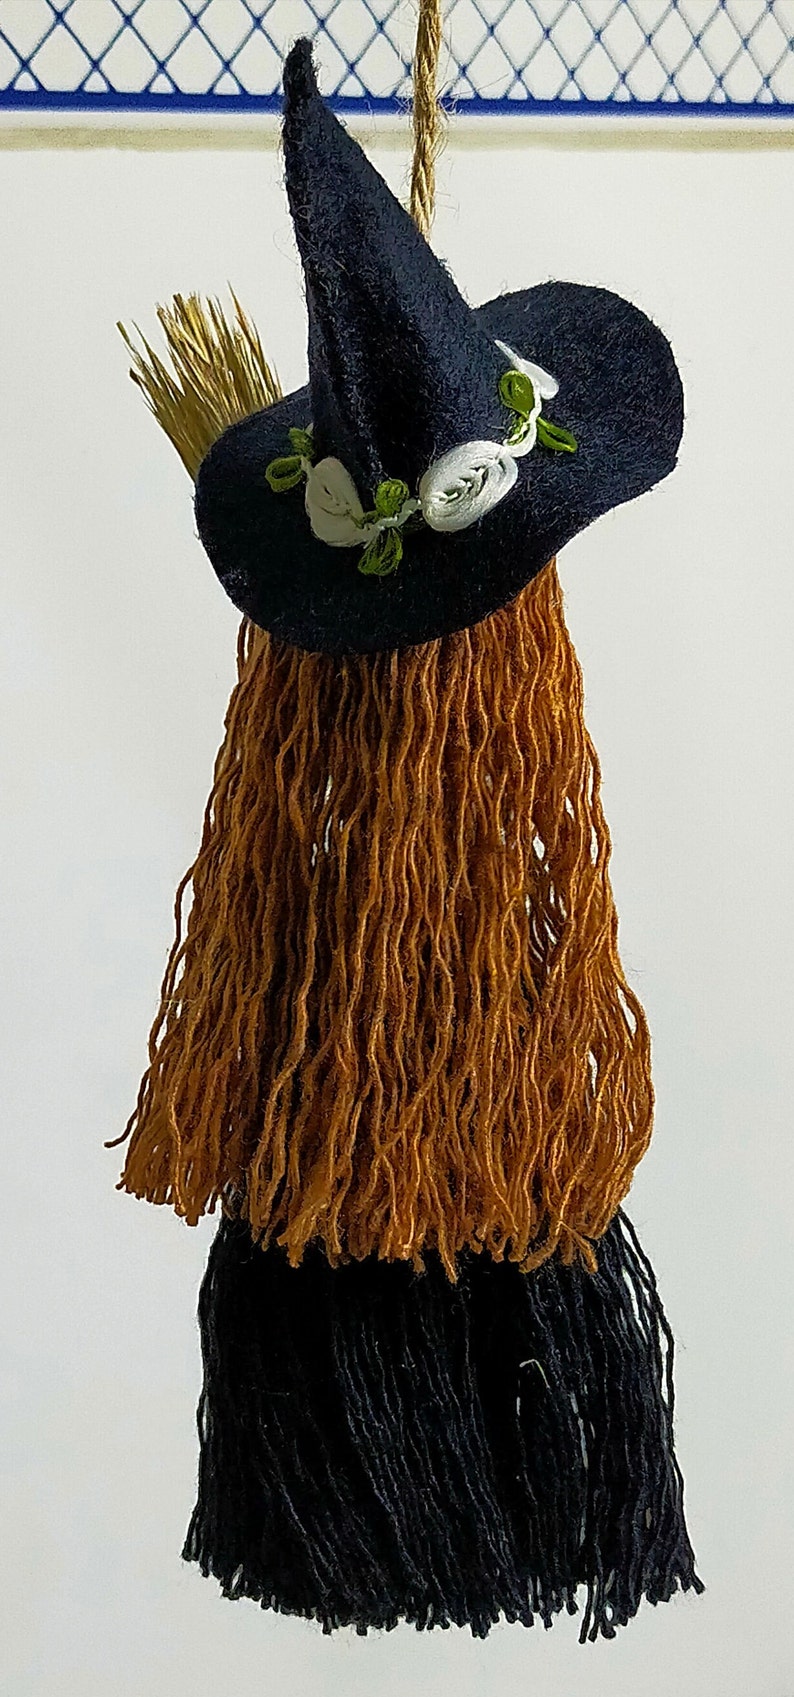 Kitchen Witch Wizard Handmade Witch Protection Luck Witch Broom, Vintage Design New Home Gift Housewarming, Boho nursery decor, Macrame Doll image 7